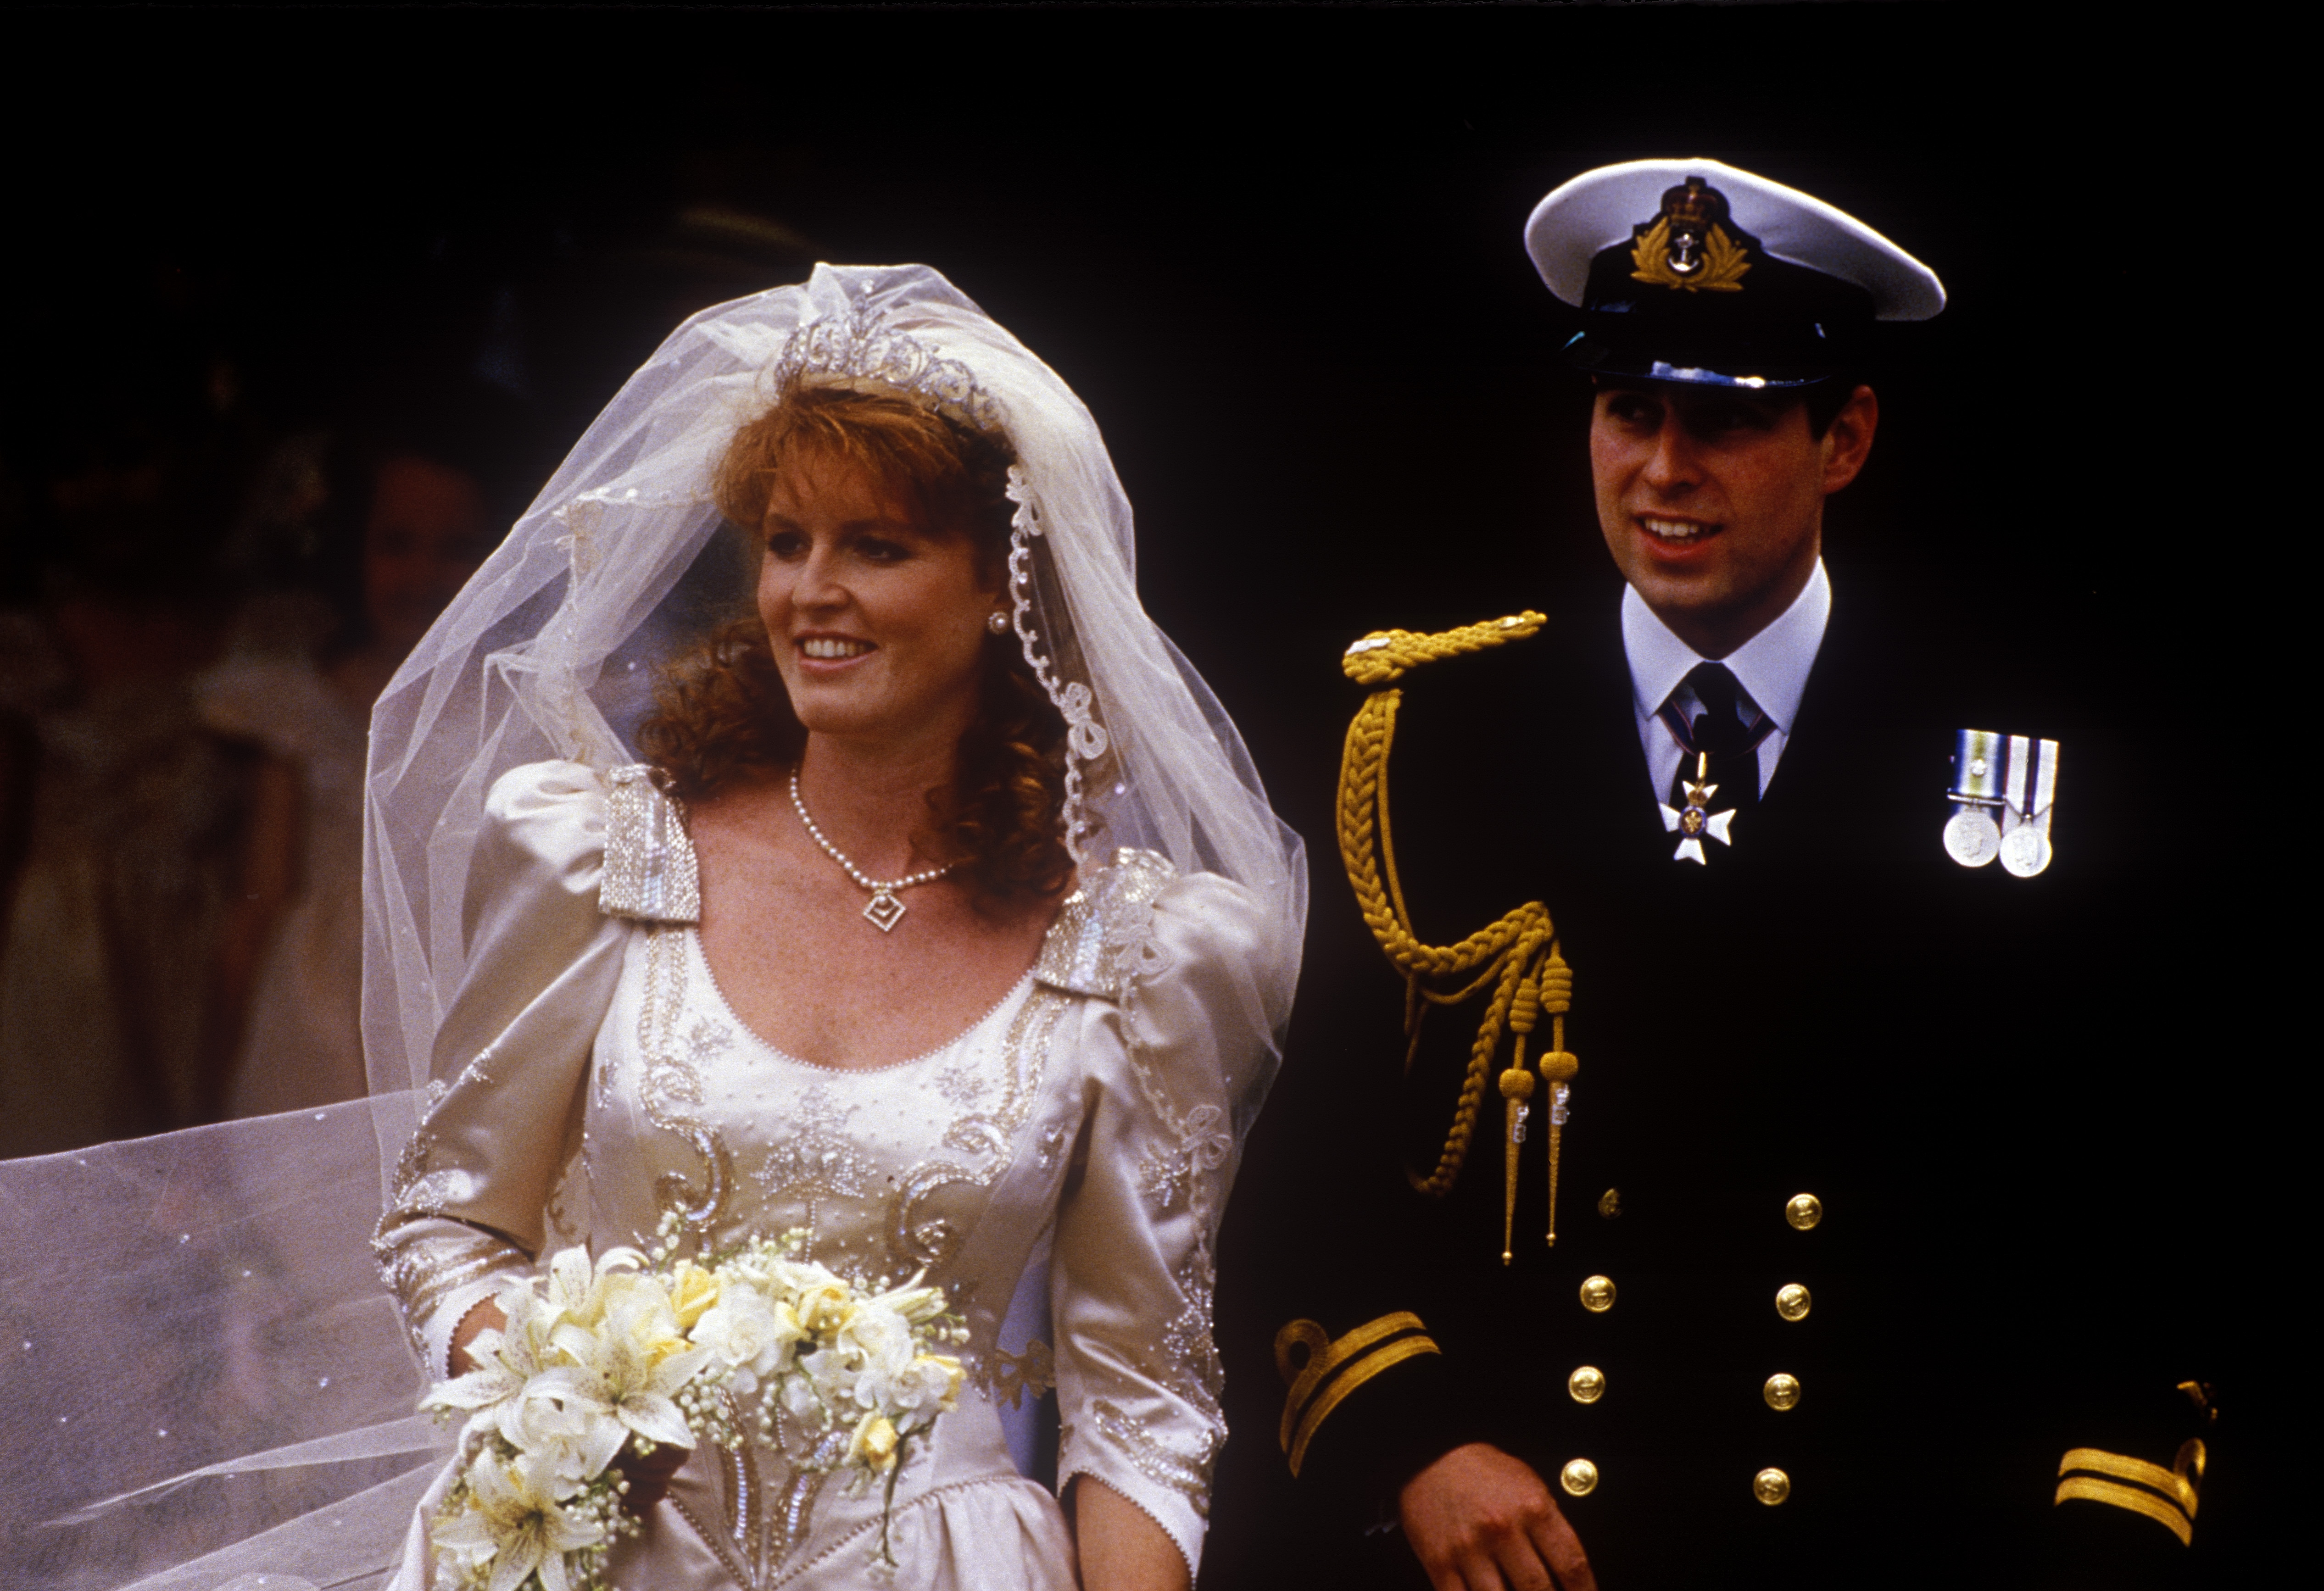 Sarah Ferguson and Prince Andrew, Duke of York, during their wedding day at Westminster Abbey, London, on July 23, 1986 | Source: Getty Images